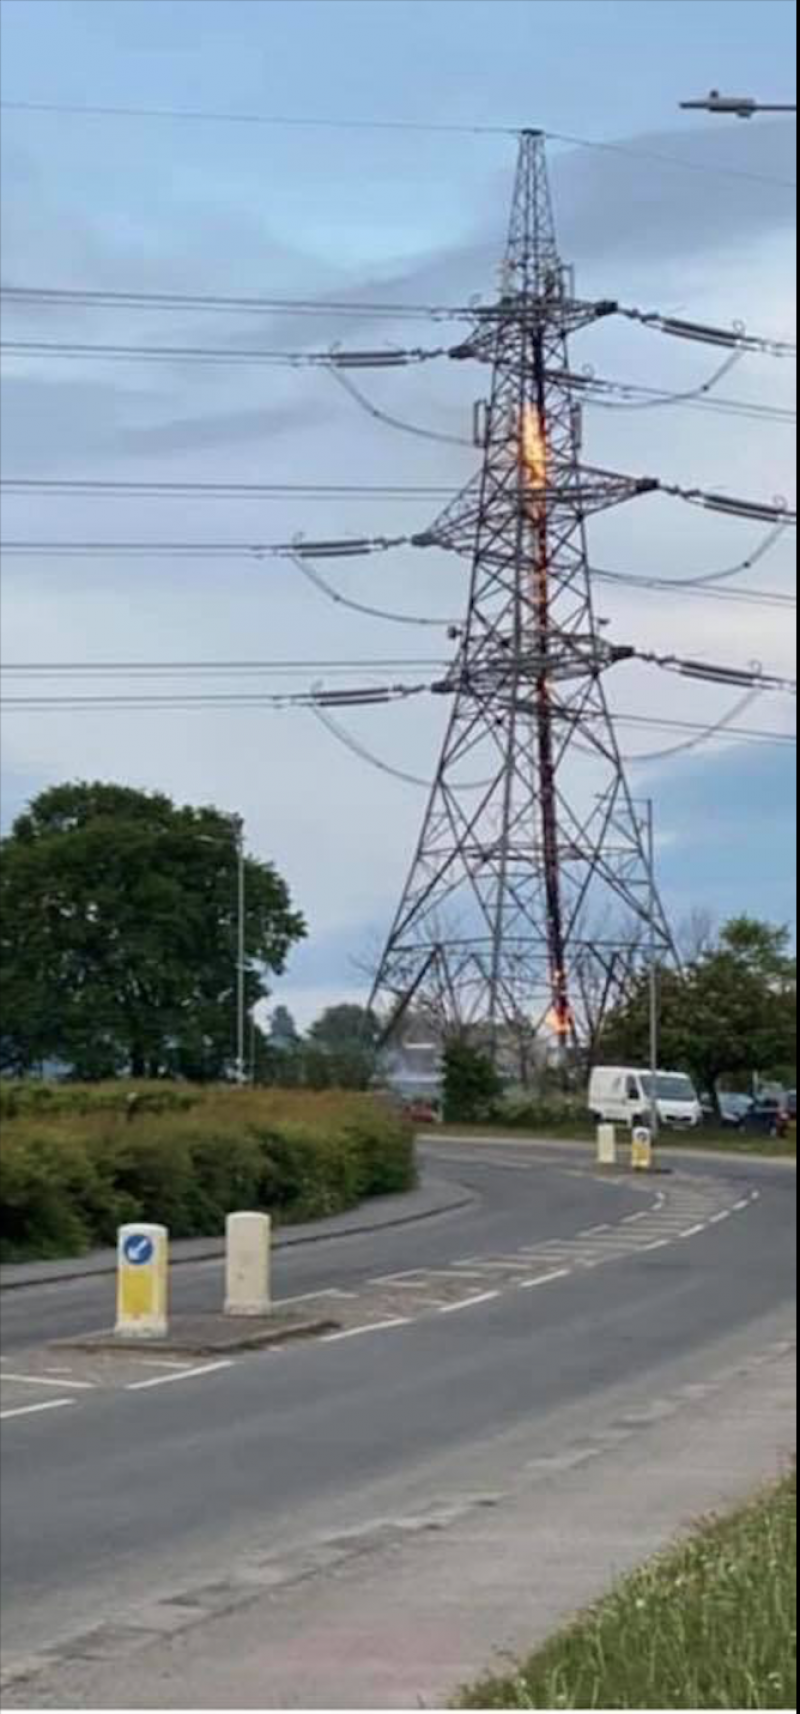 Main image for Firefighters tackle pylon fire